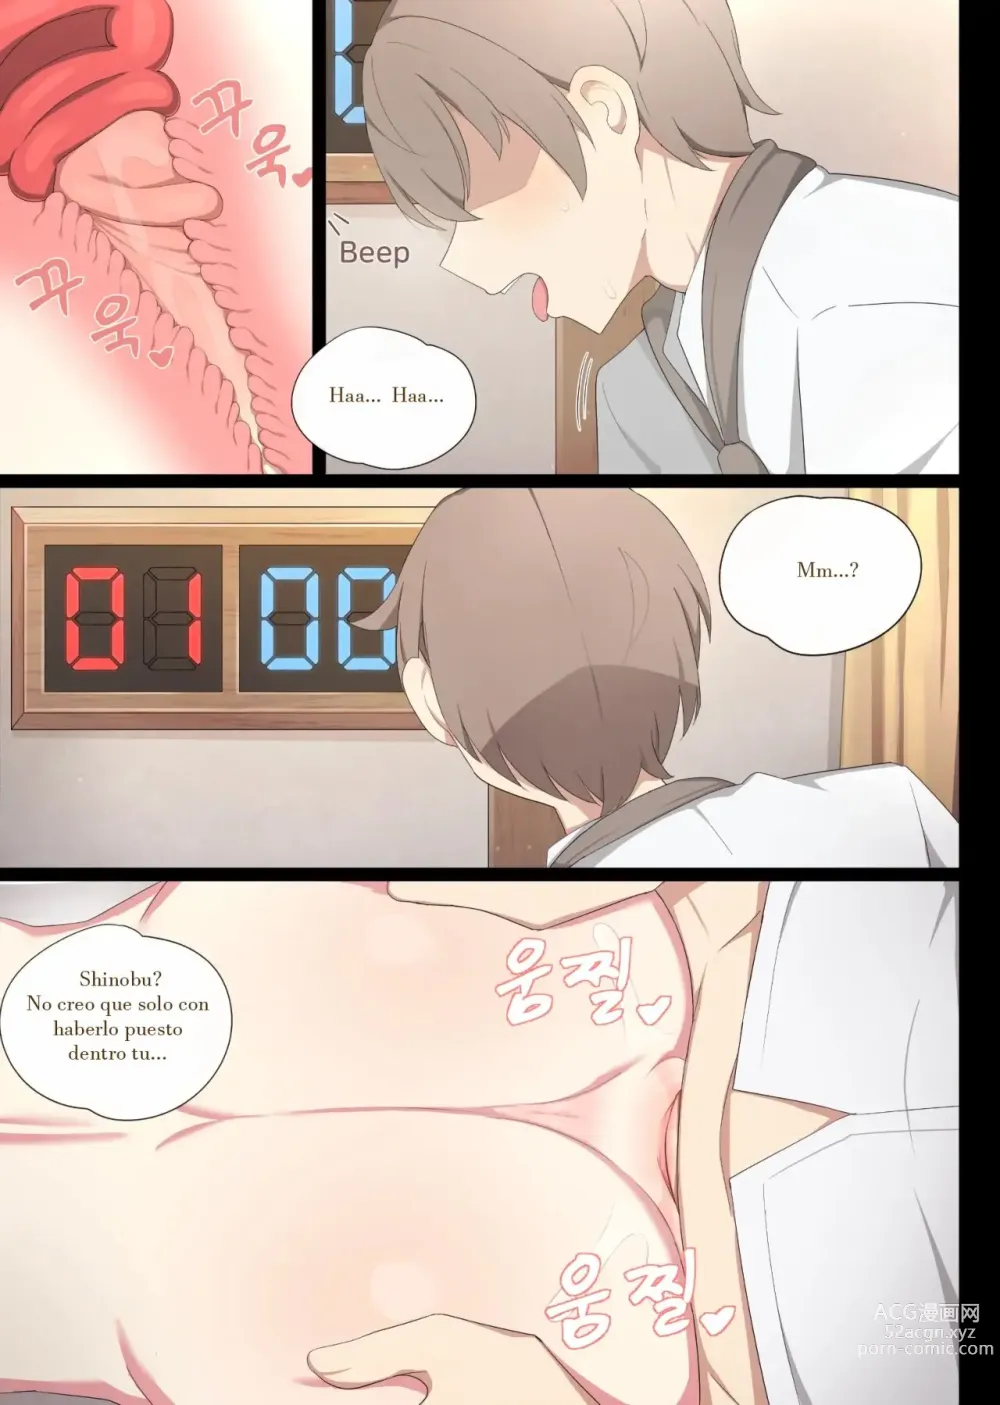 Page 5 of doujinshi A room where you can't go out without xxx (decensored)